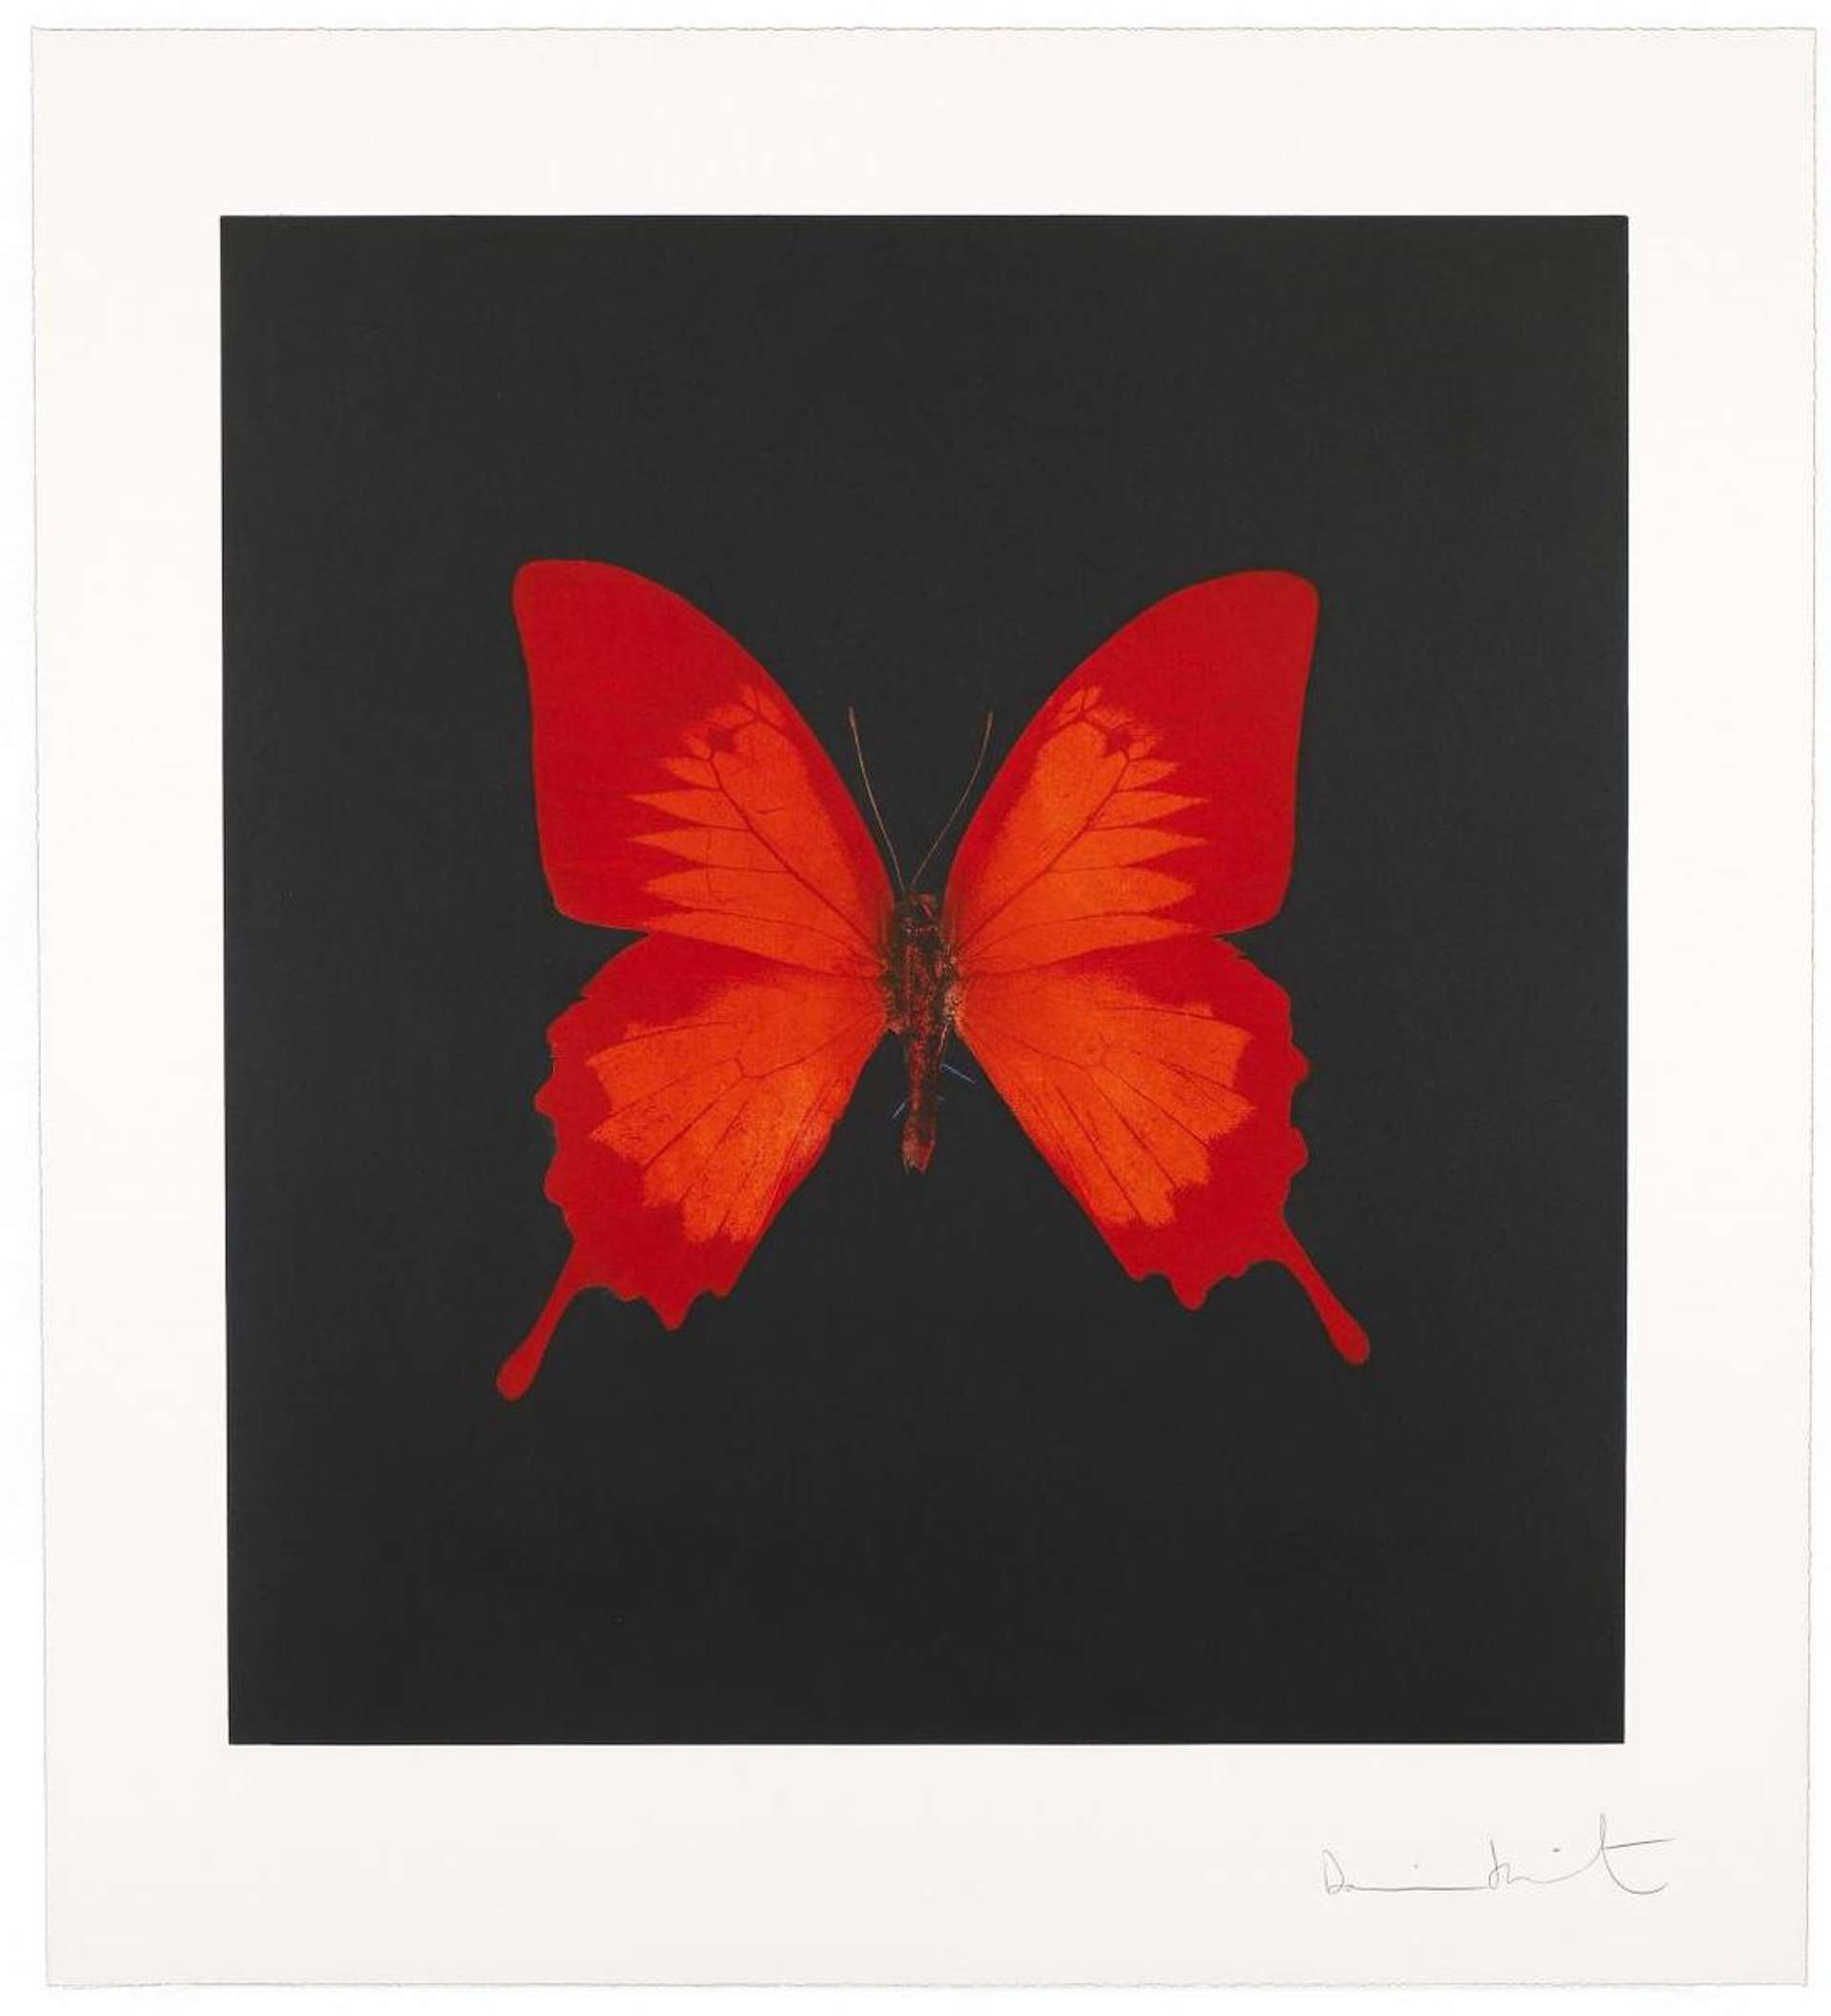 Damien Hirst screenprint of a red butterfly against a black background, printed on white with the border edge visible.